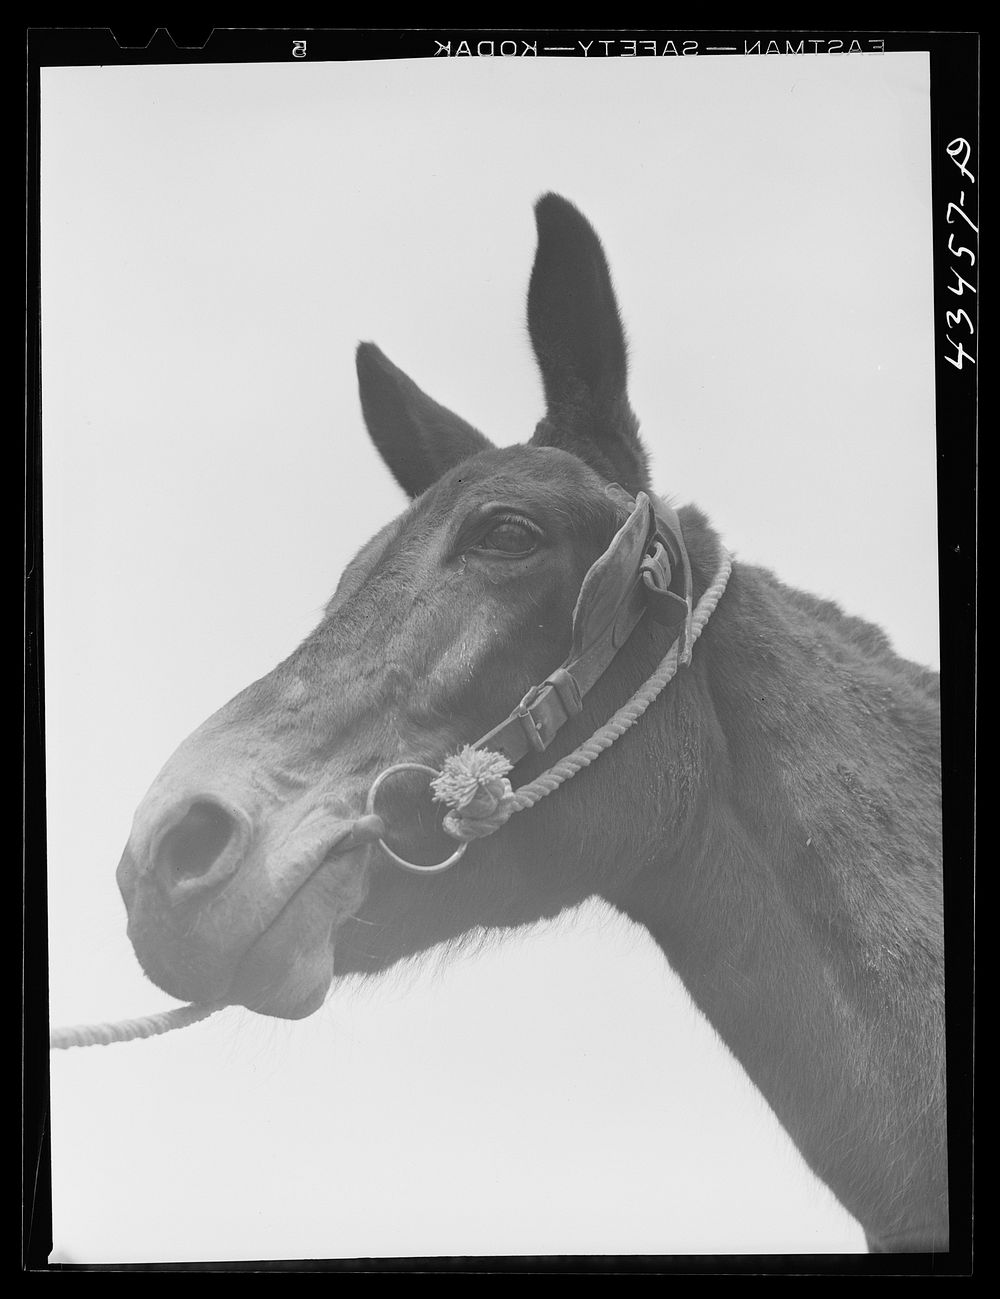 Mule. Santee-Cooper Basin, South Carolina. Sourced from the Library of Congress.